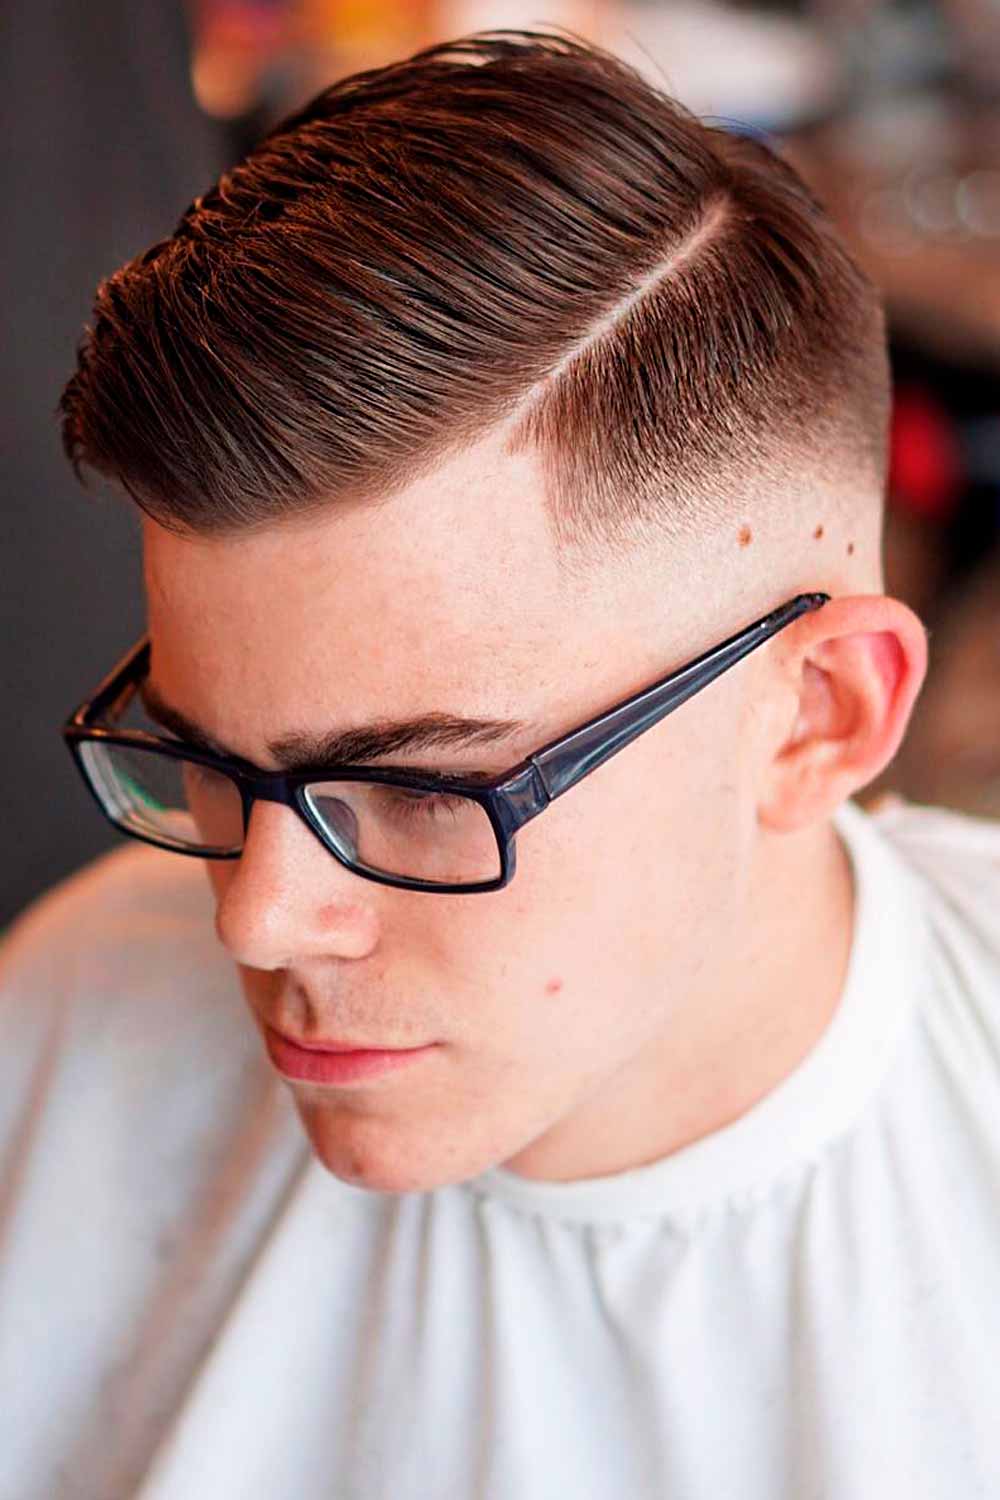 Cool Low Haircut Styles That Will Make You Ditch Hair Extensions | FPN